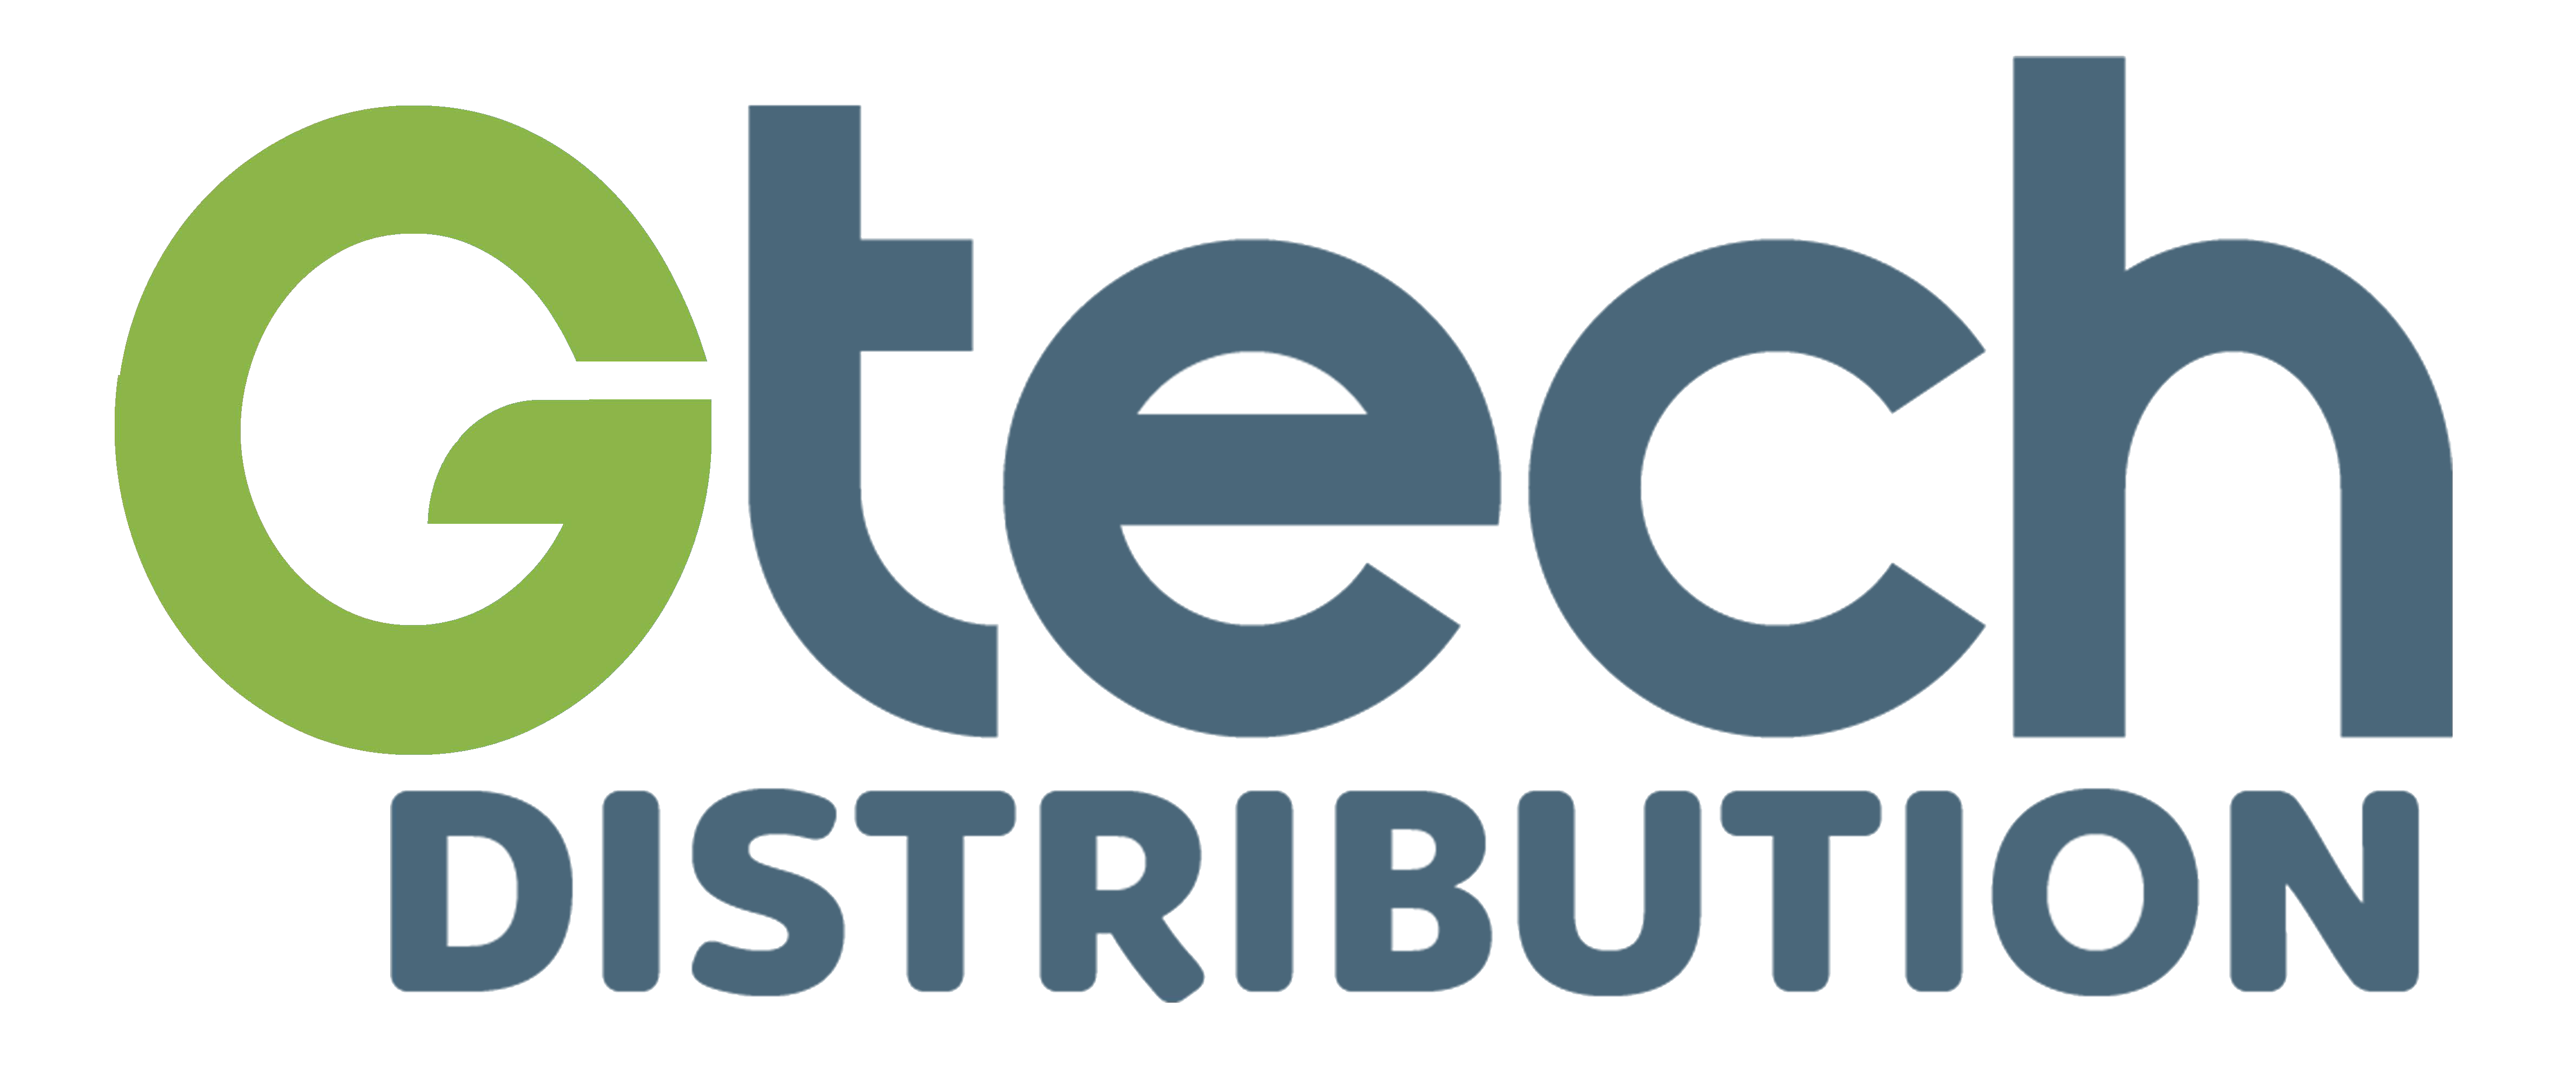 Homepage - Gtech Distributions